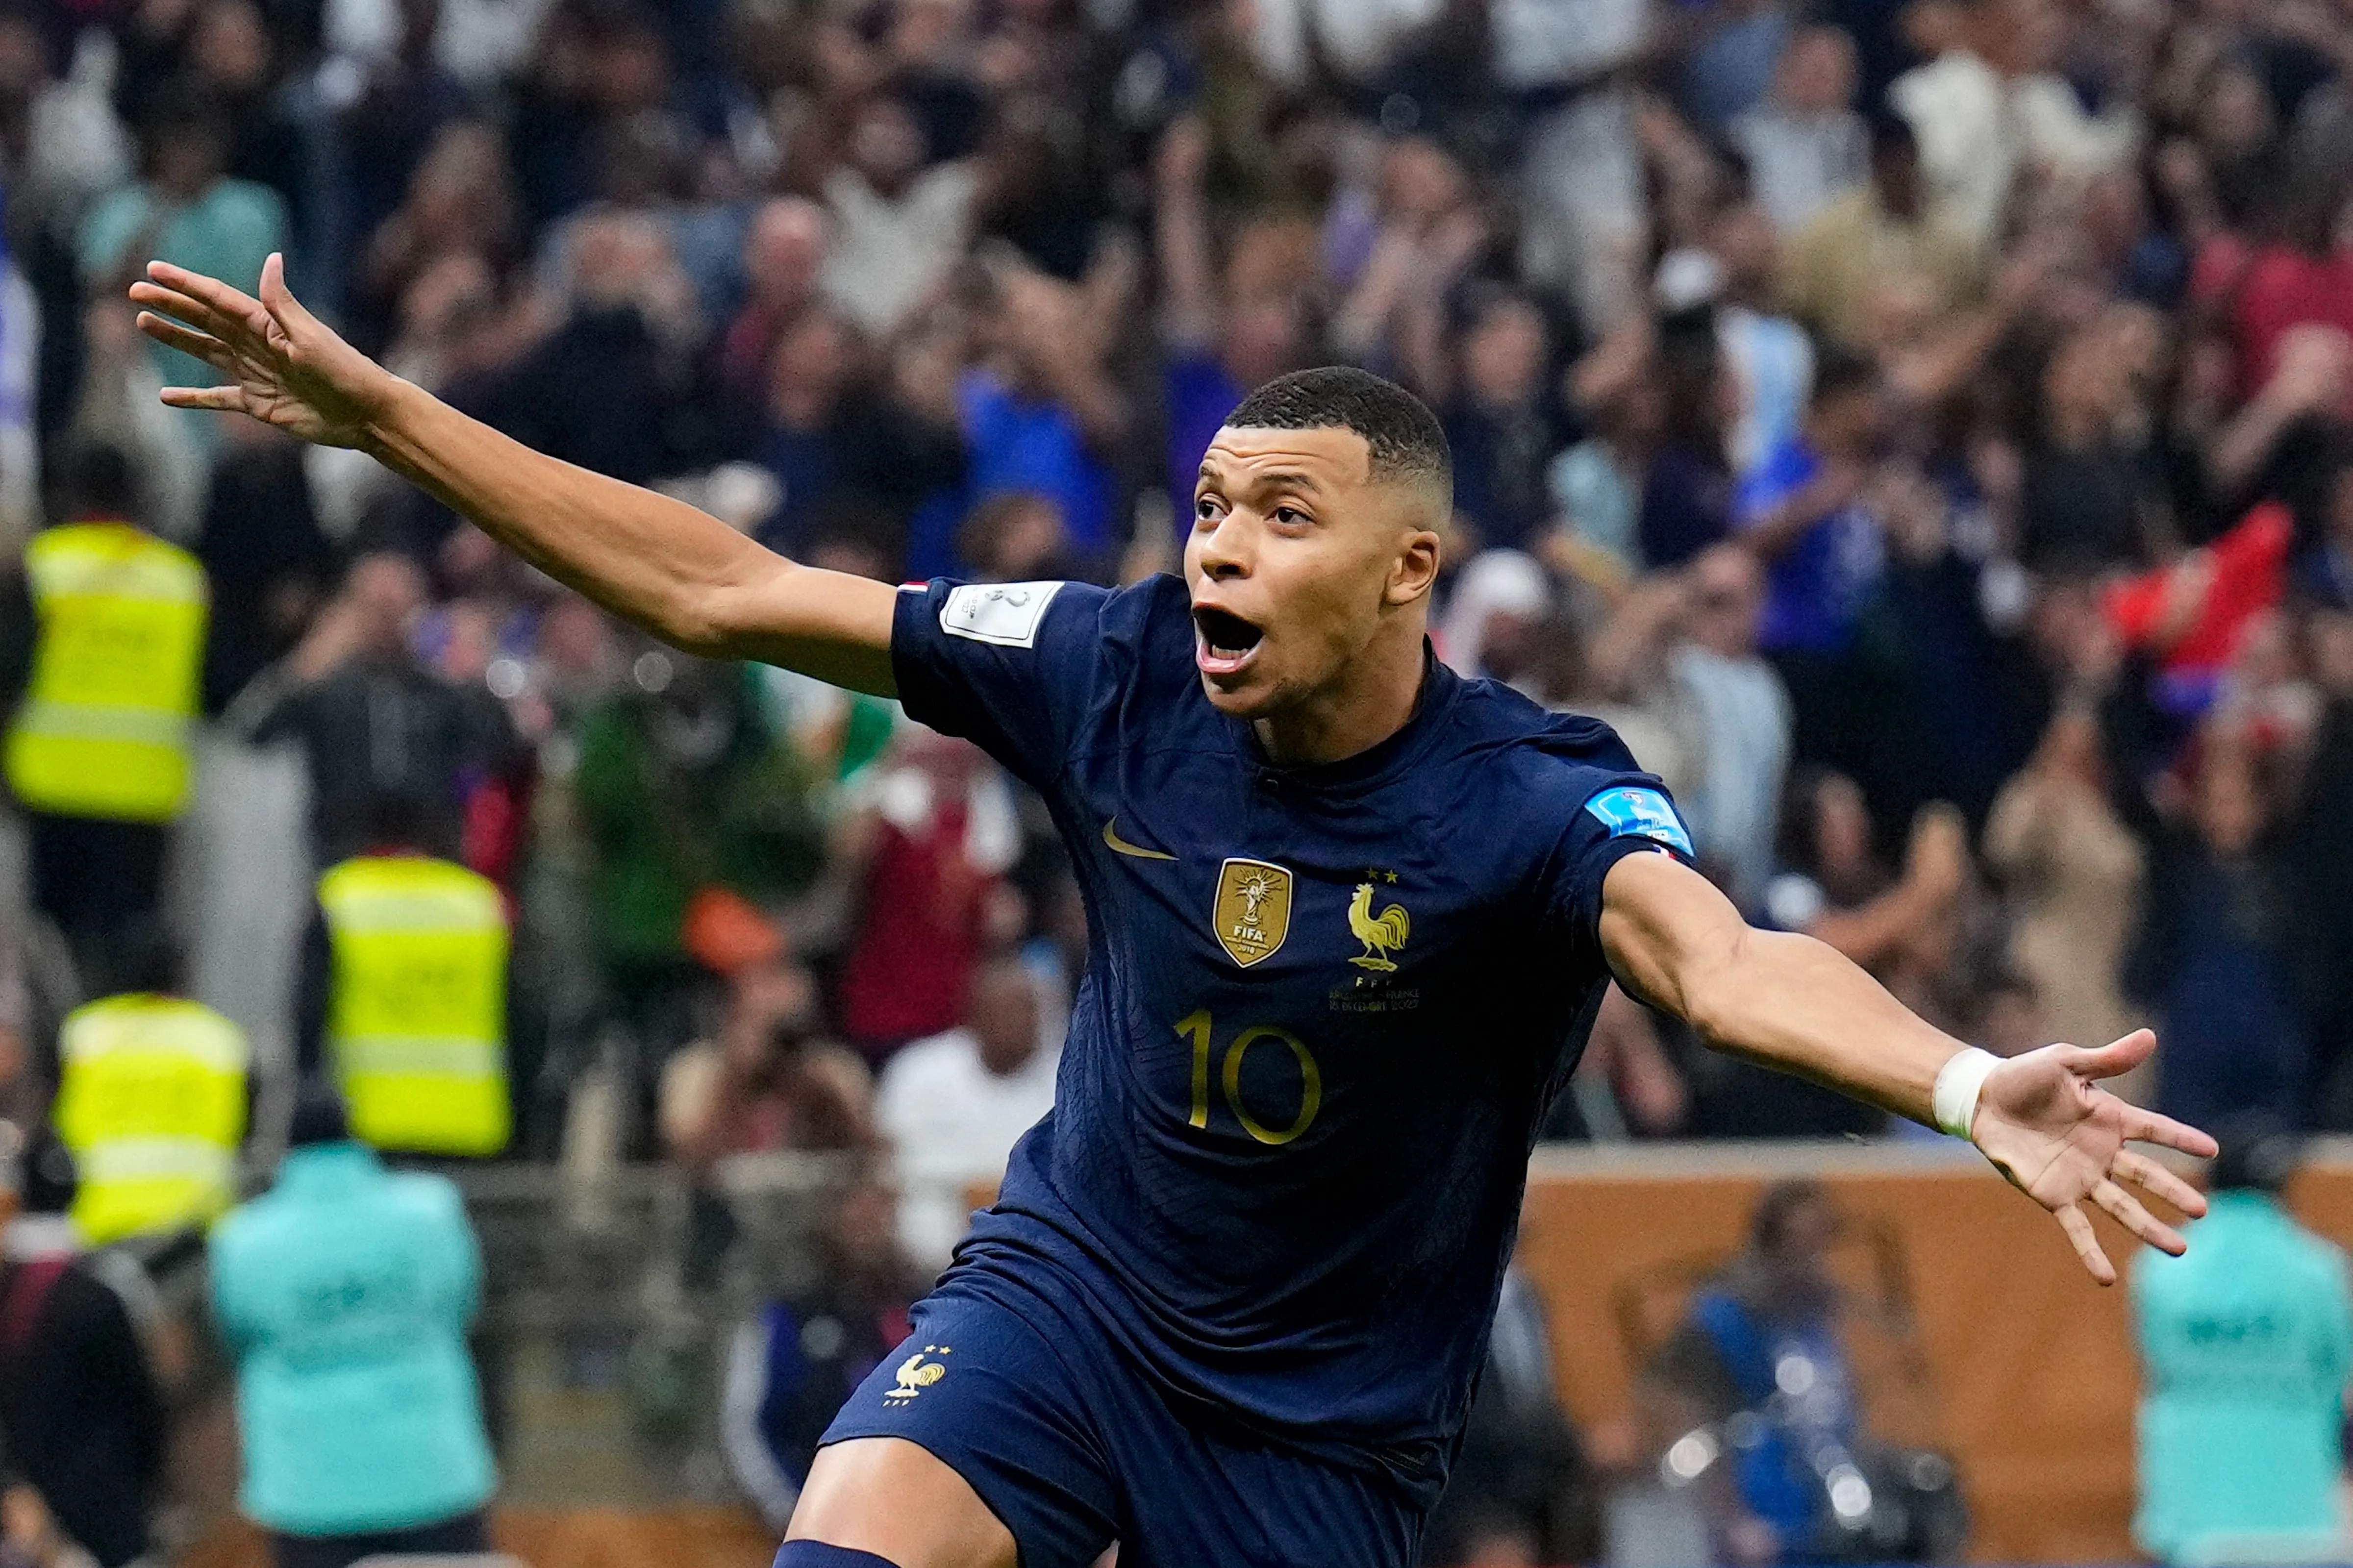 France’s Kylian Mbappe second player to score a hat-trick in World Cup ...